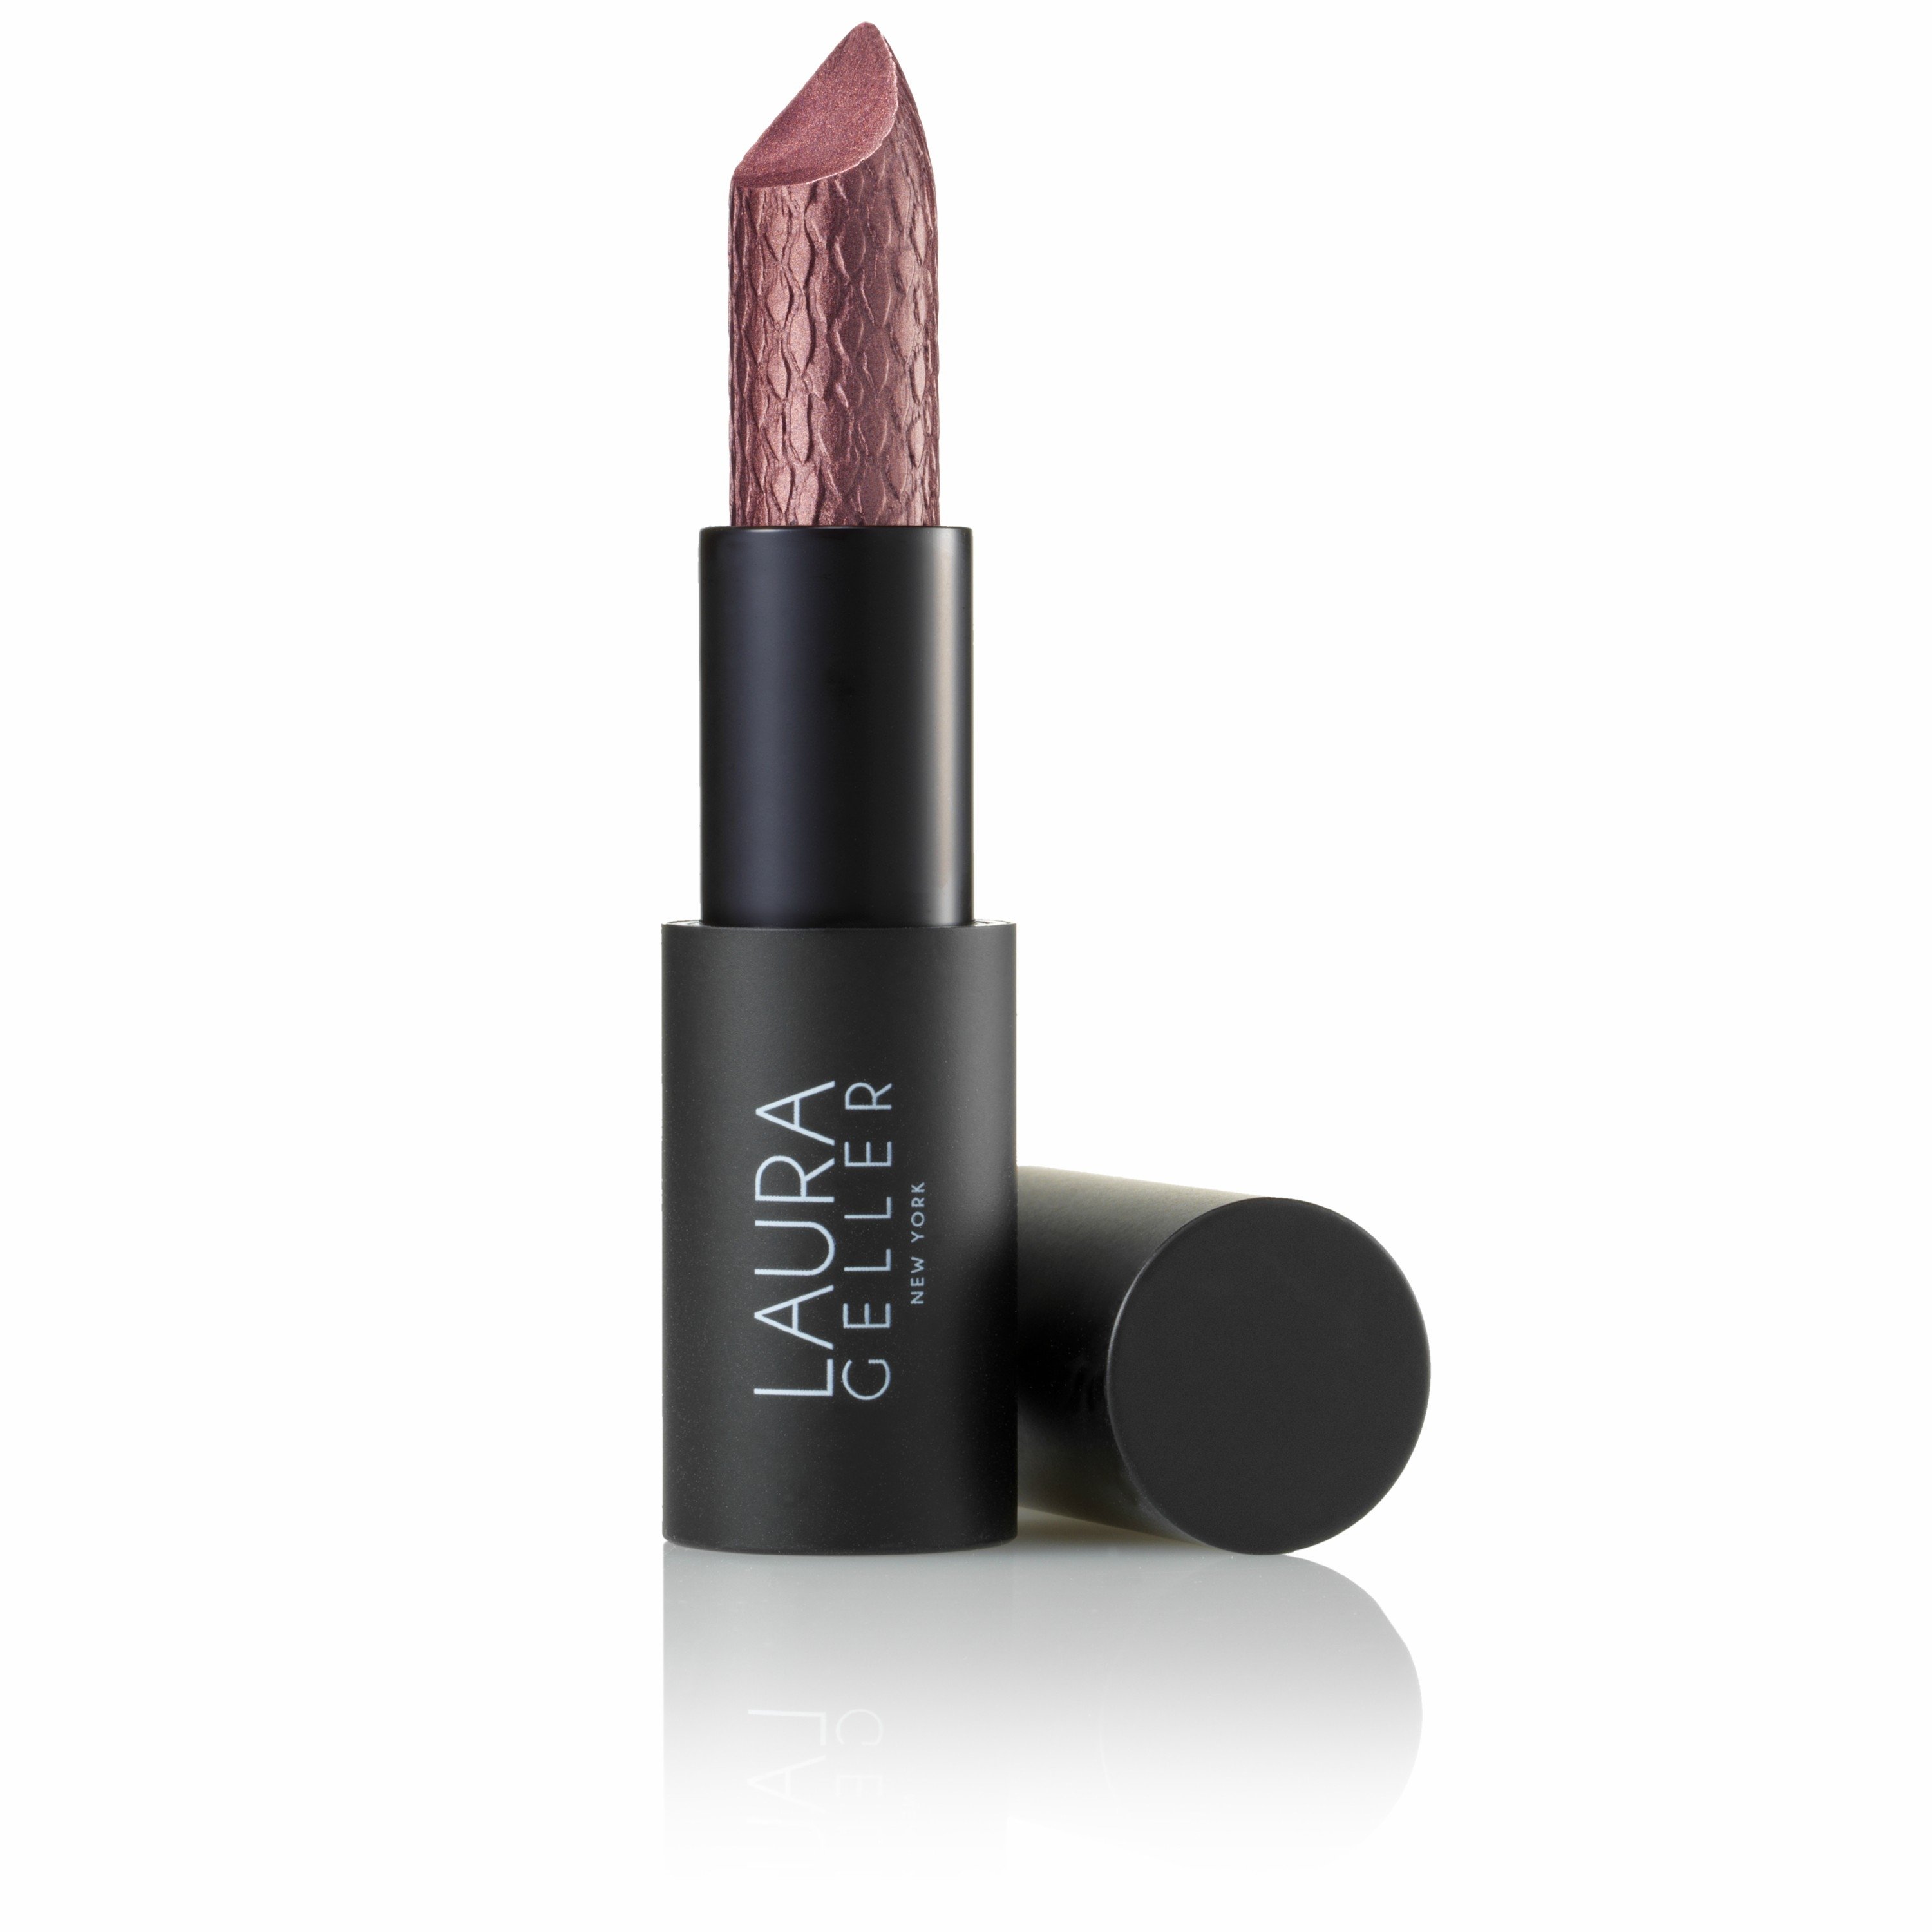 Iconic Baked Sculpting Lipstick